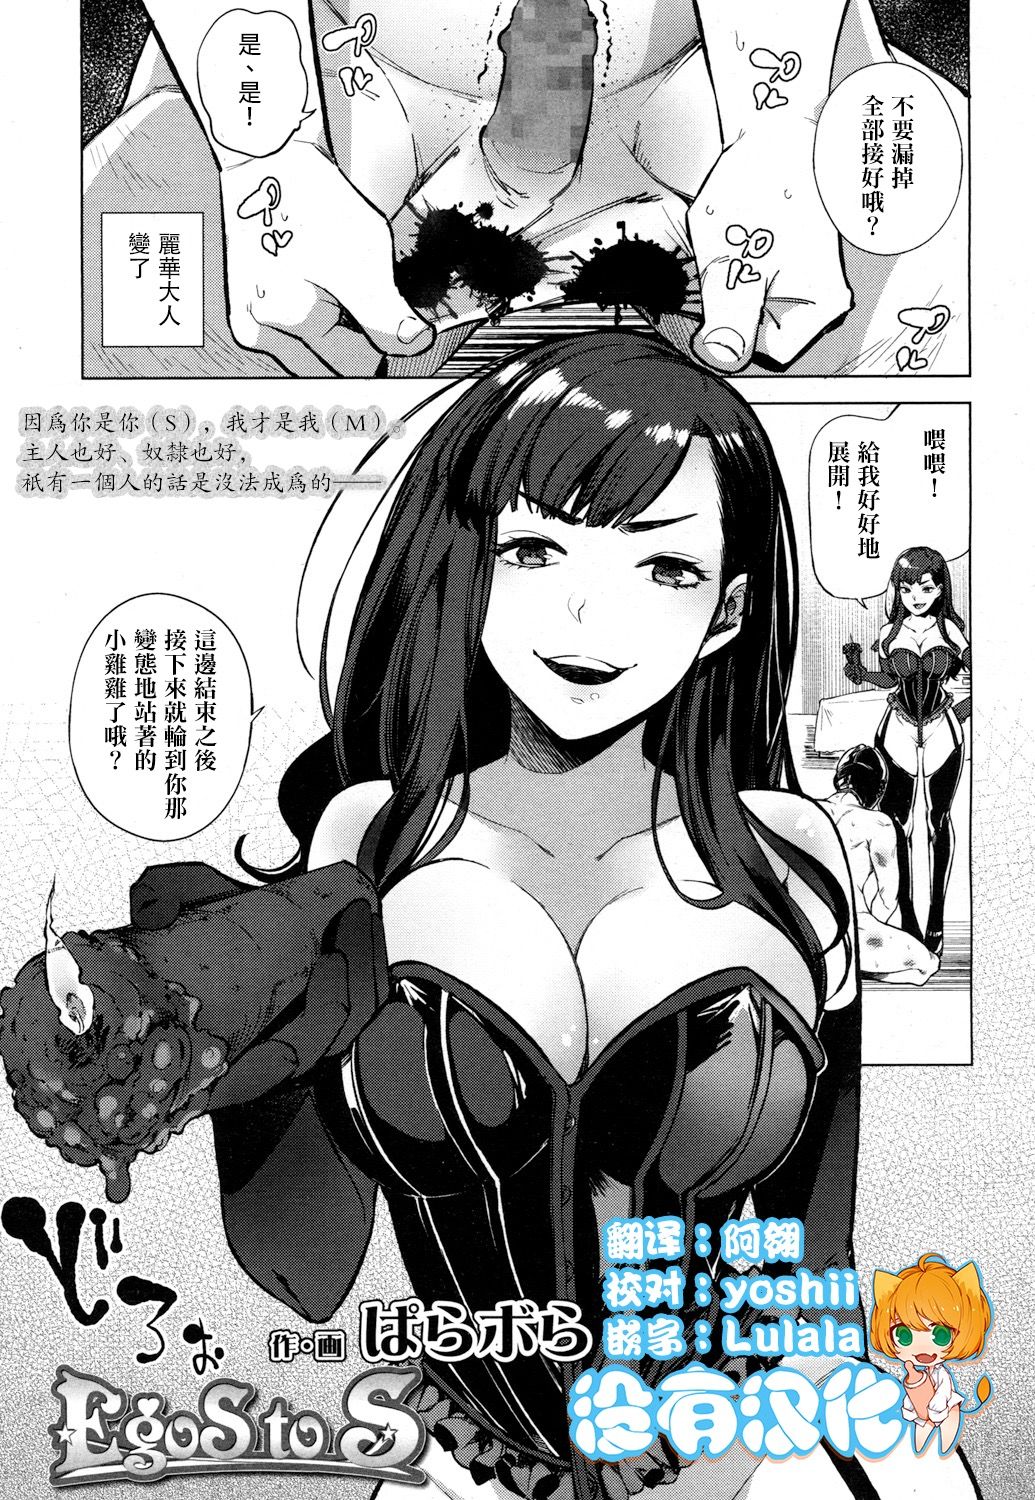 [Parabola] EgoS to S (Girls forM Vol.15) [Chinese] [沒有漢化] [Digital] page 1 full